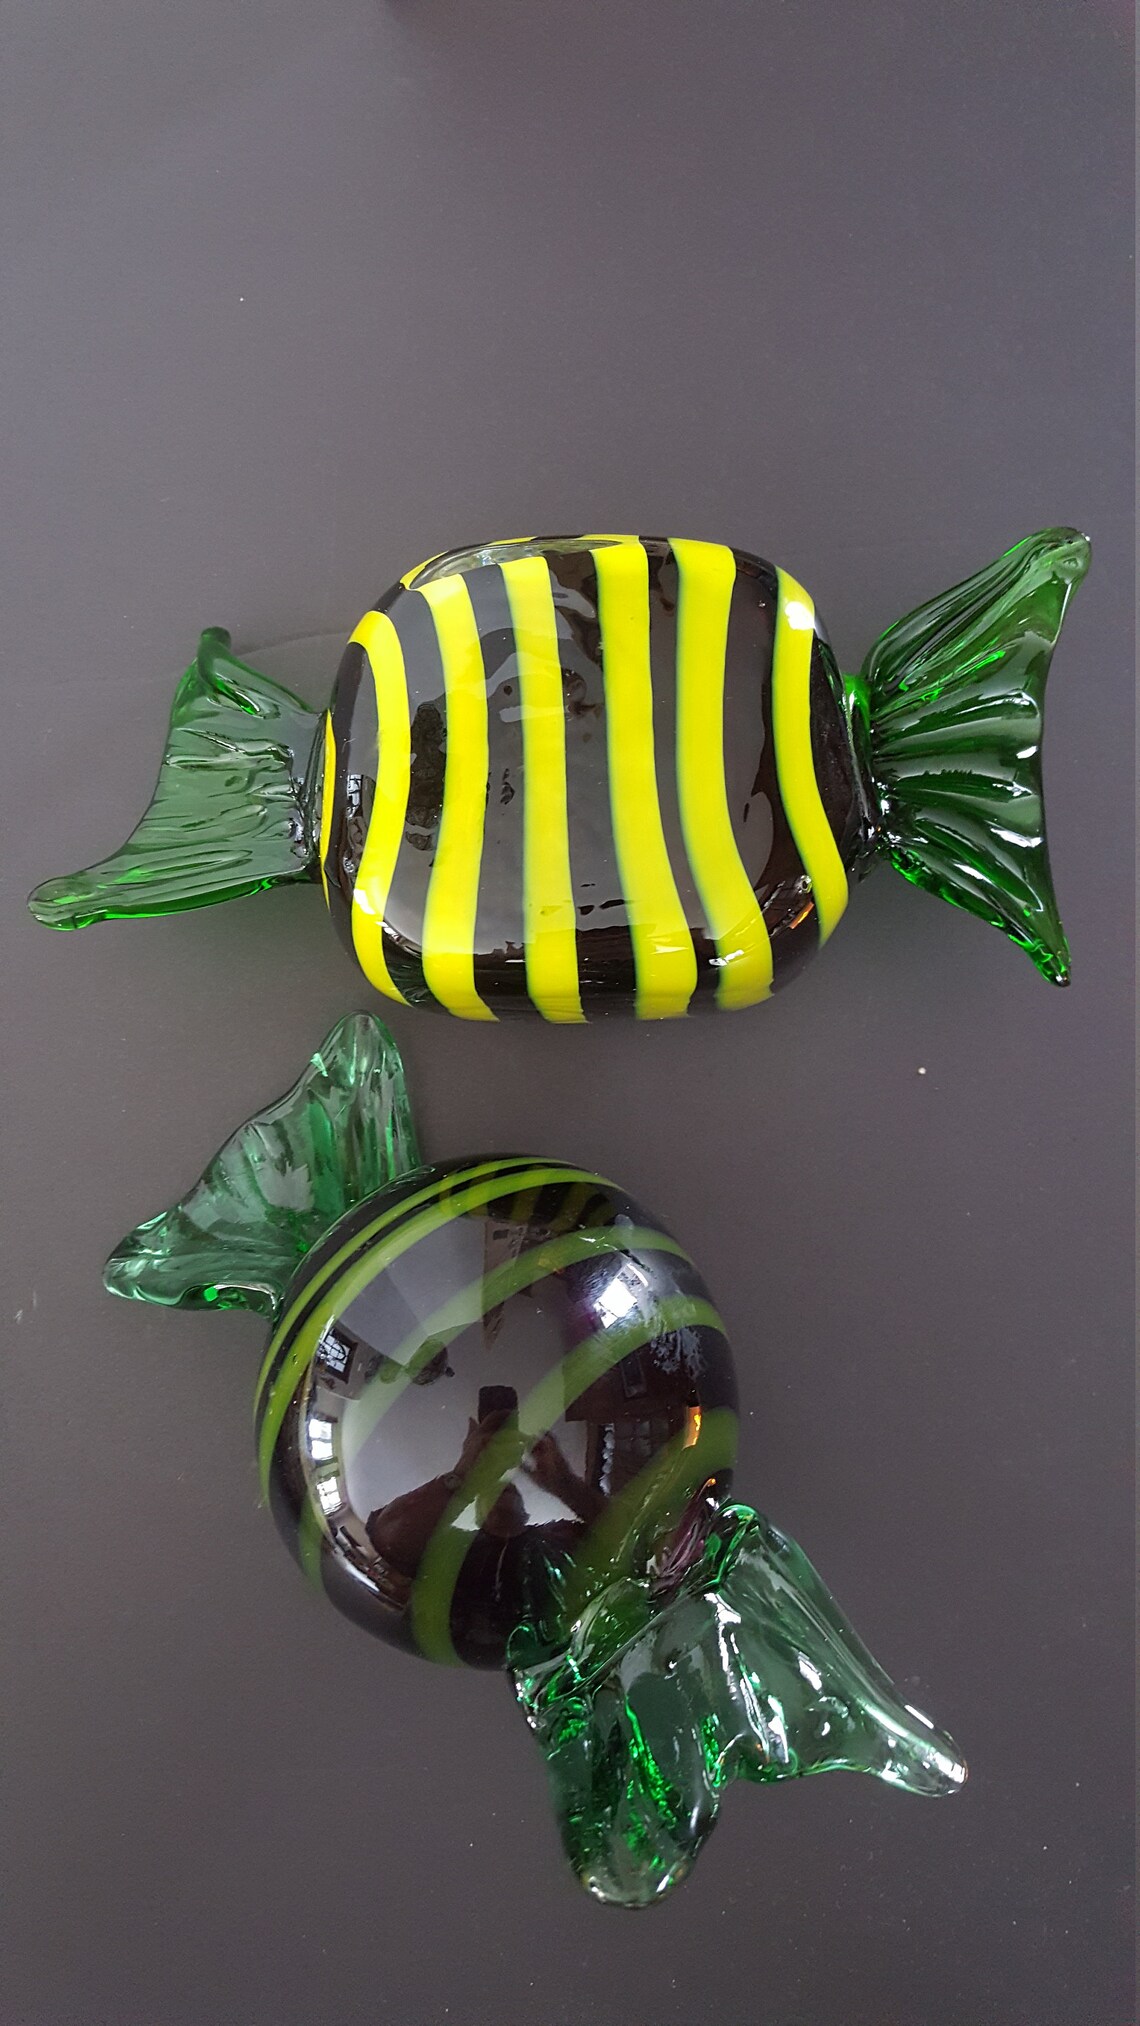 Blown Glass 2 Confectionery/candies 7 Inchesrare - Etsy